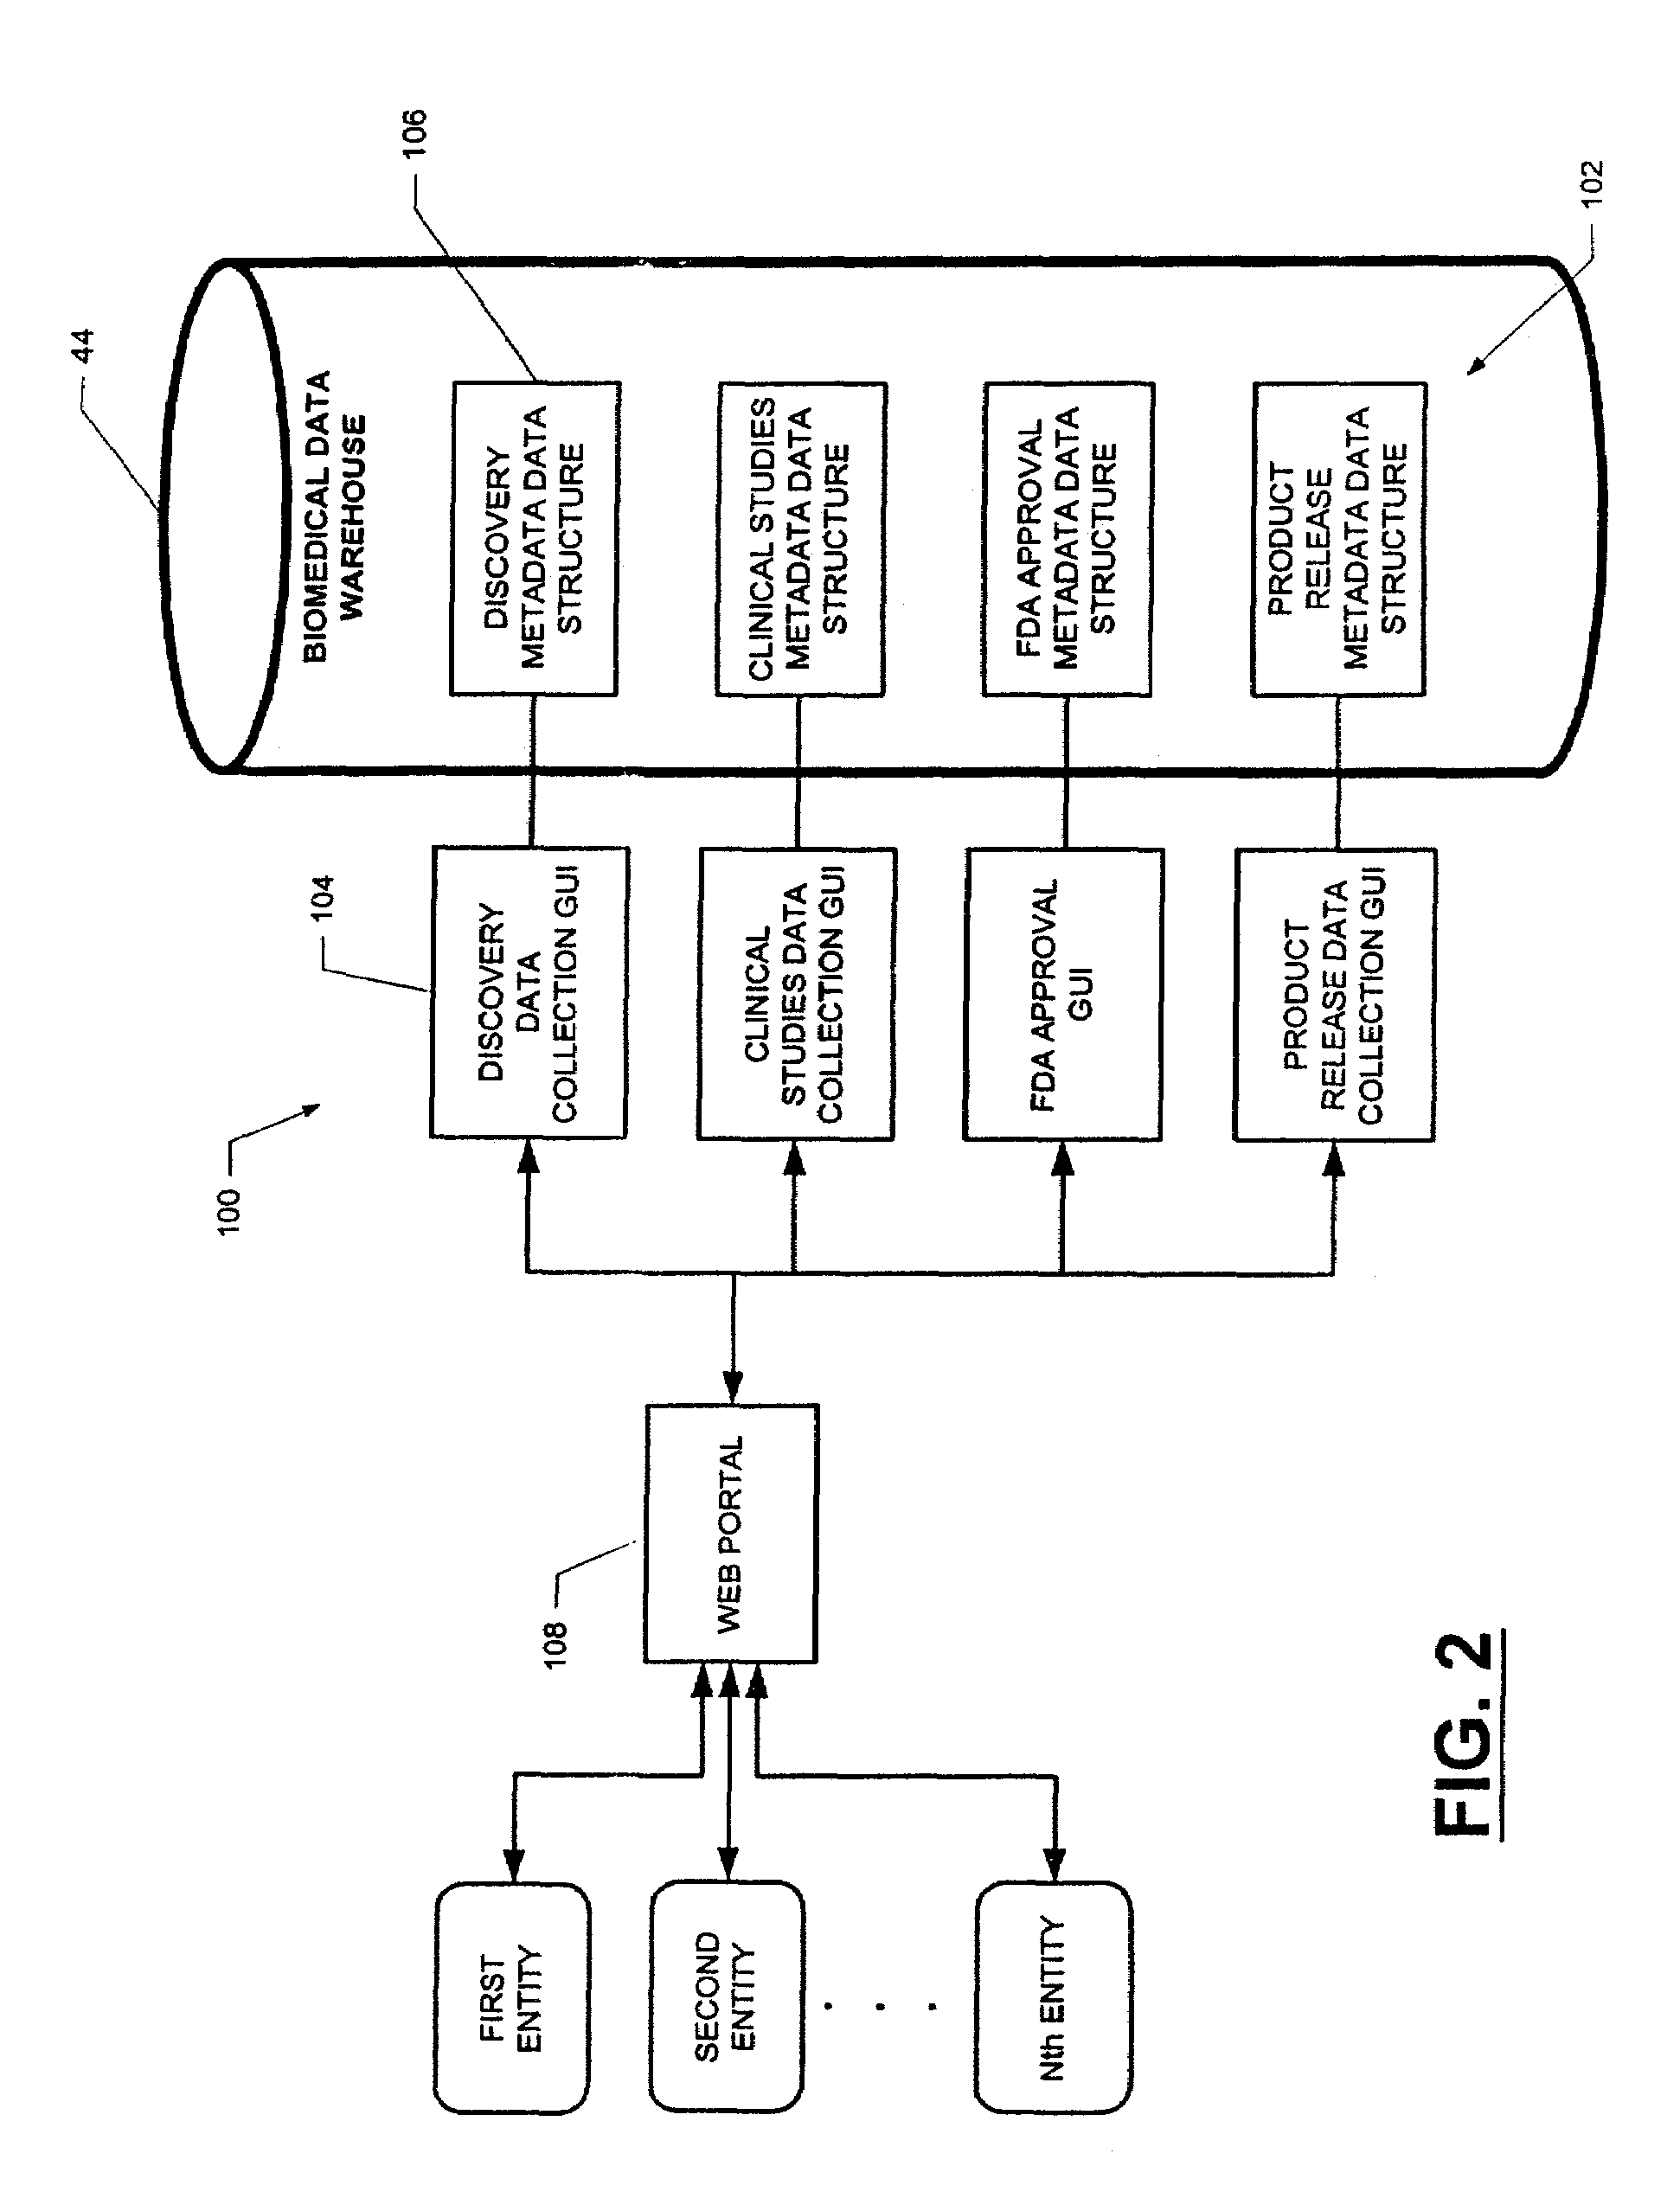 Integrated biomedical information portal system and method